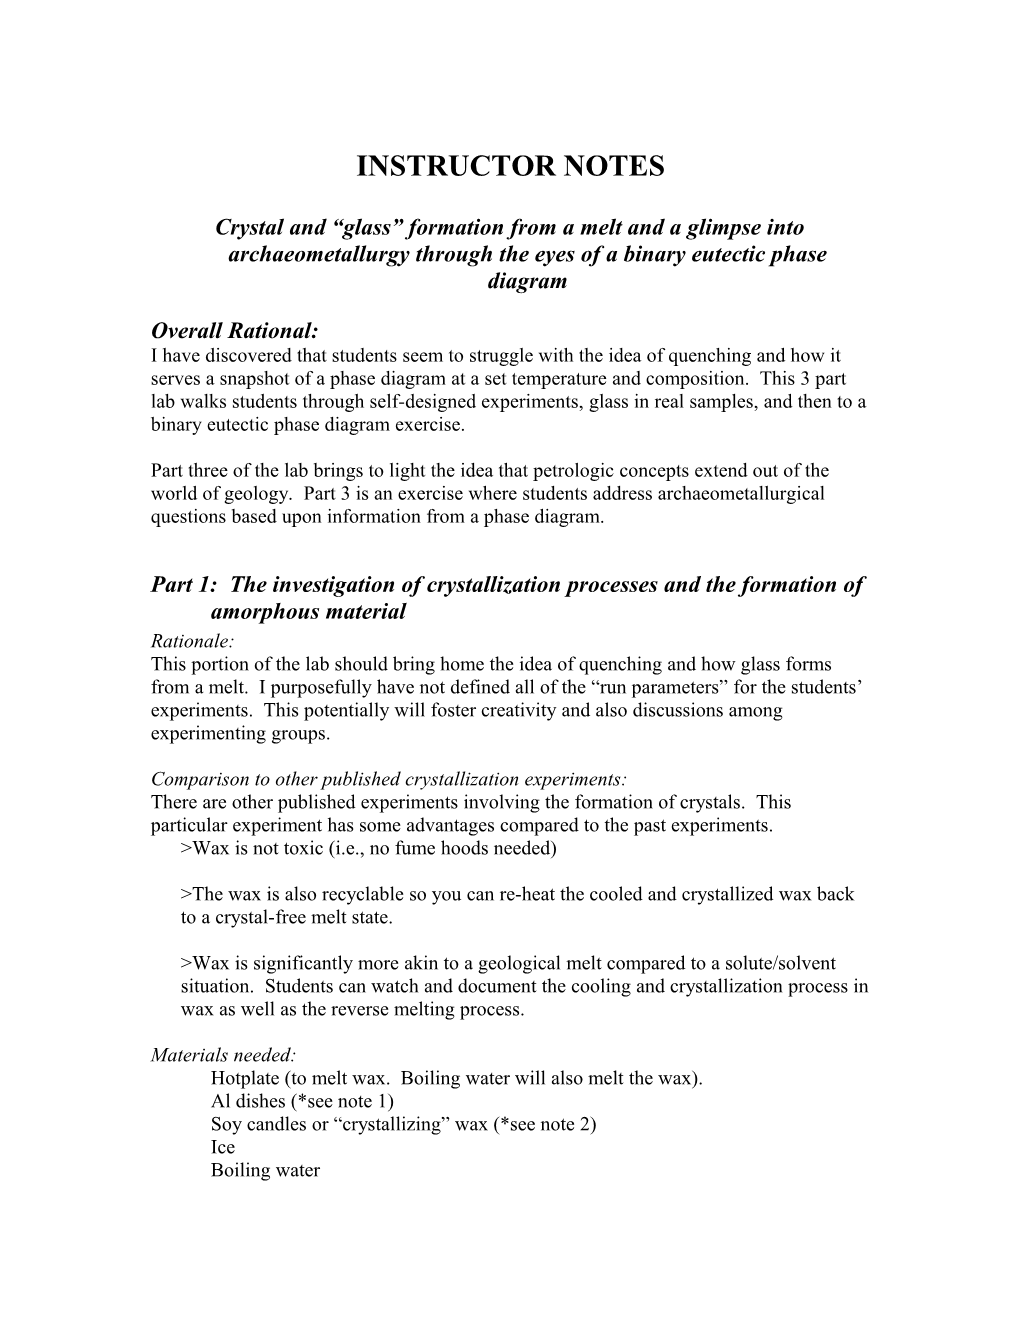 Instructor Notes